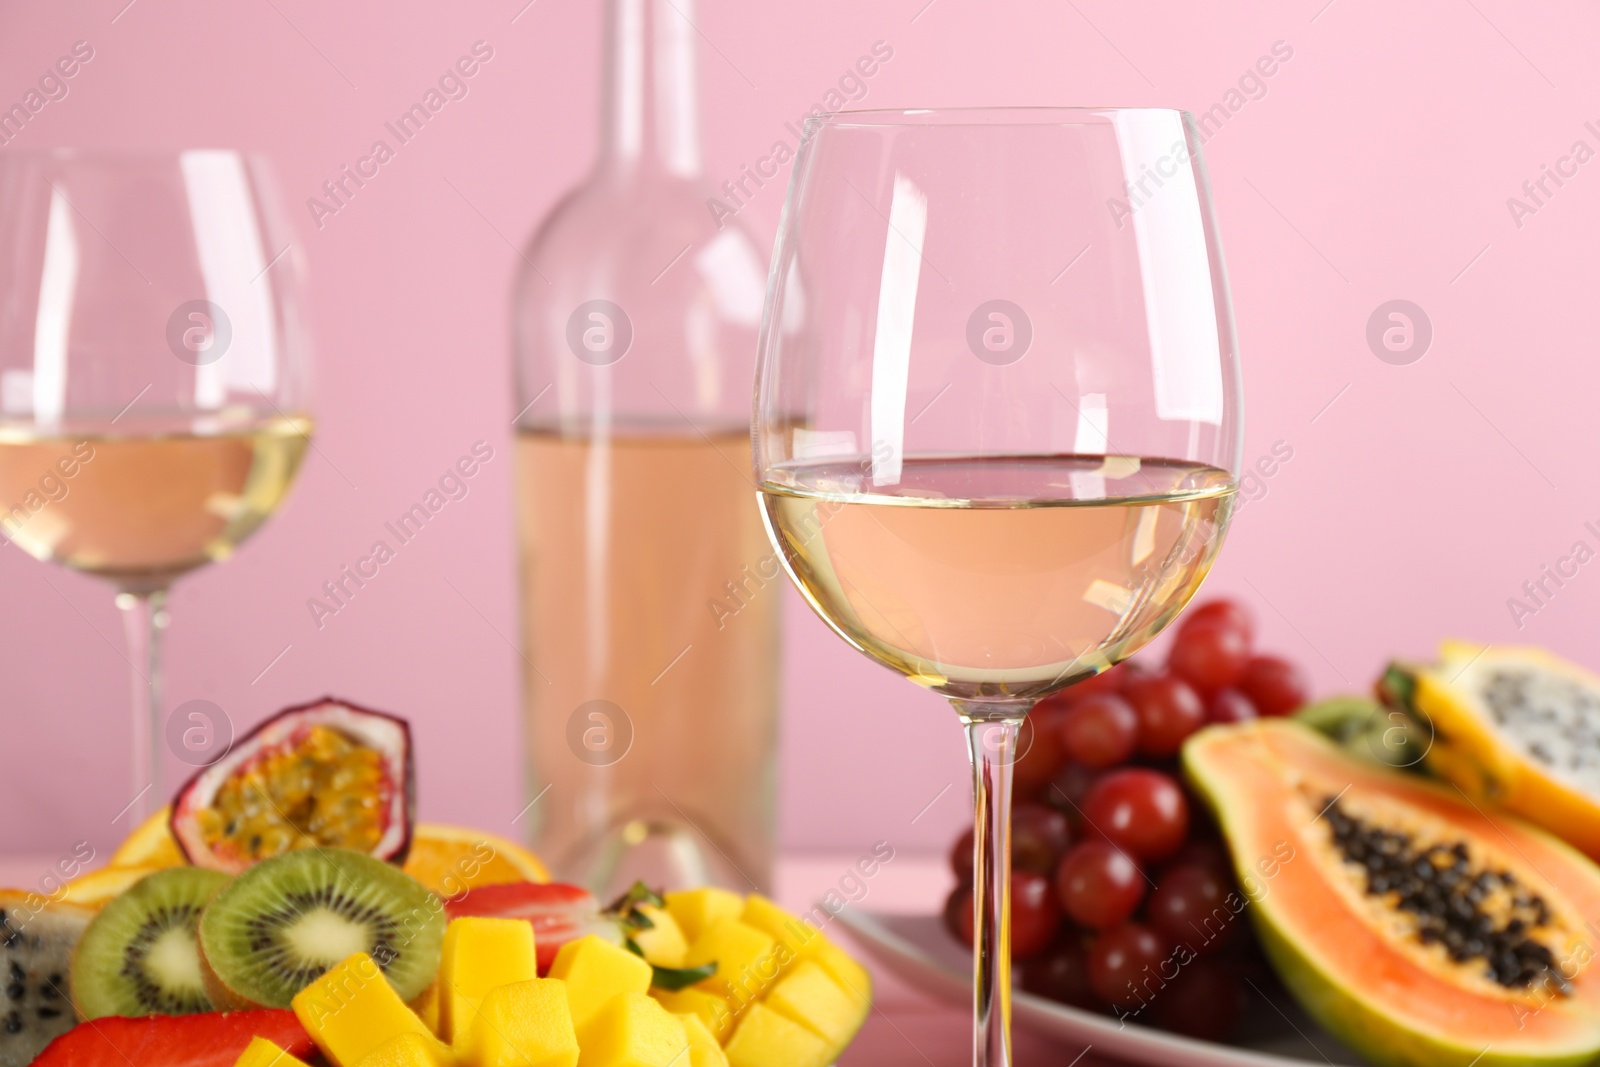 Photo of Delicious exotic fruits and glasses of wine on pink background, closeup